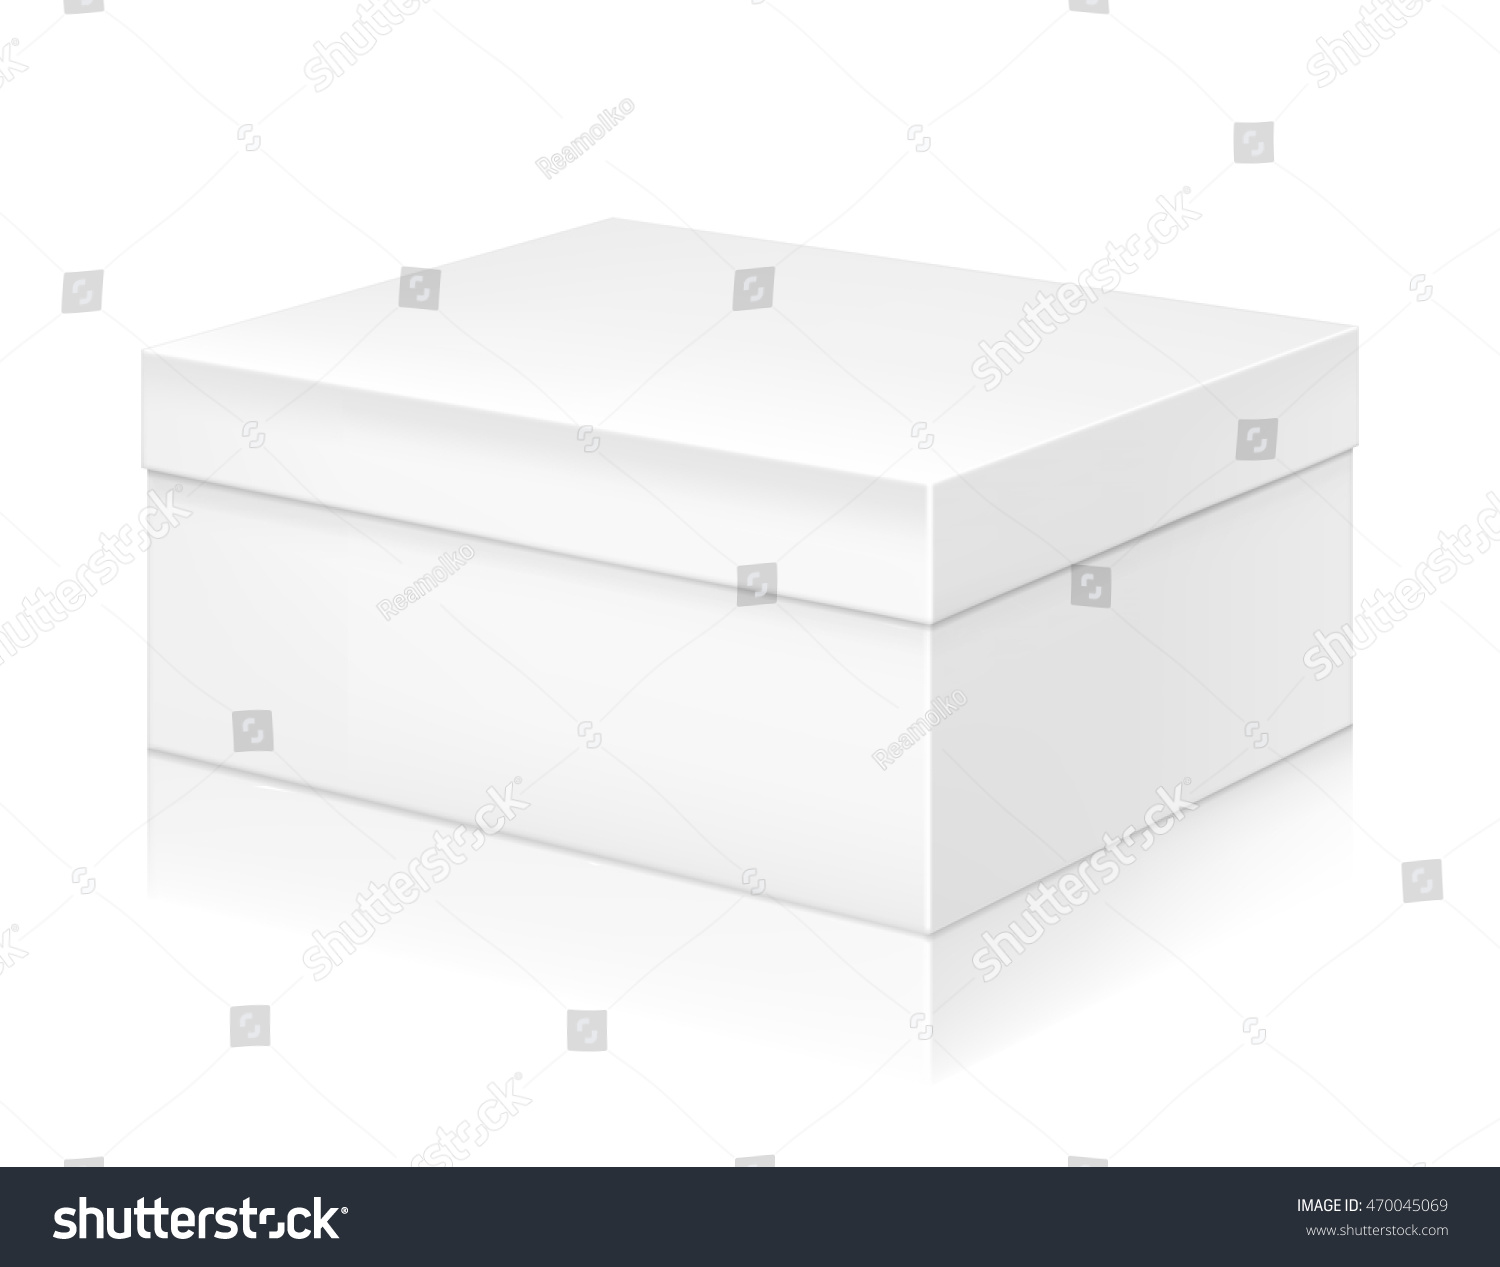 Download Paper White Shoe Box Mockup Template Stock Vector ...